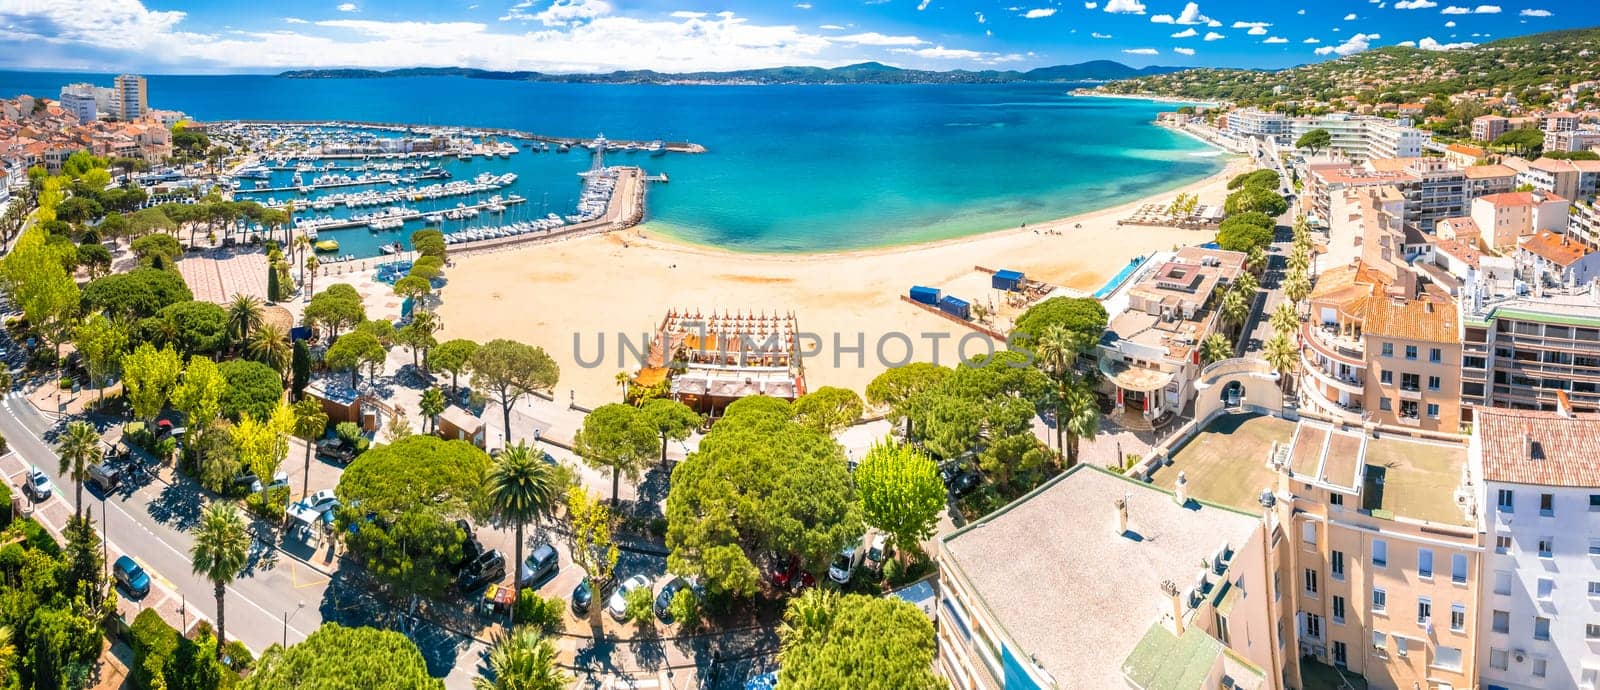 Town of Sainte Maxime beach and waterfront aerial panoramic view by xbrchx